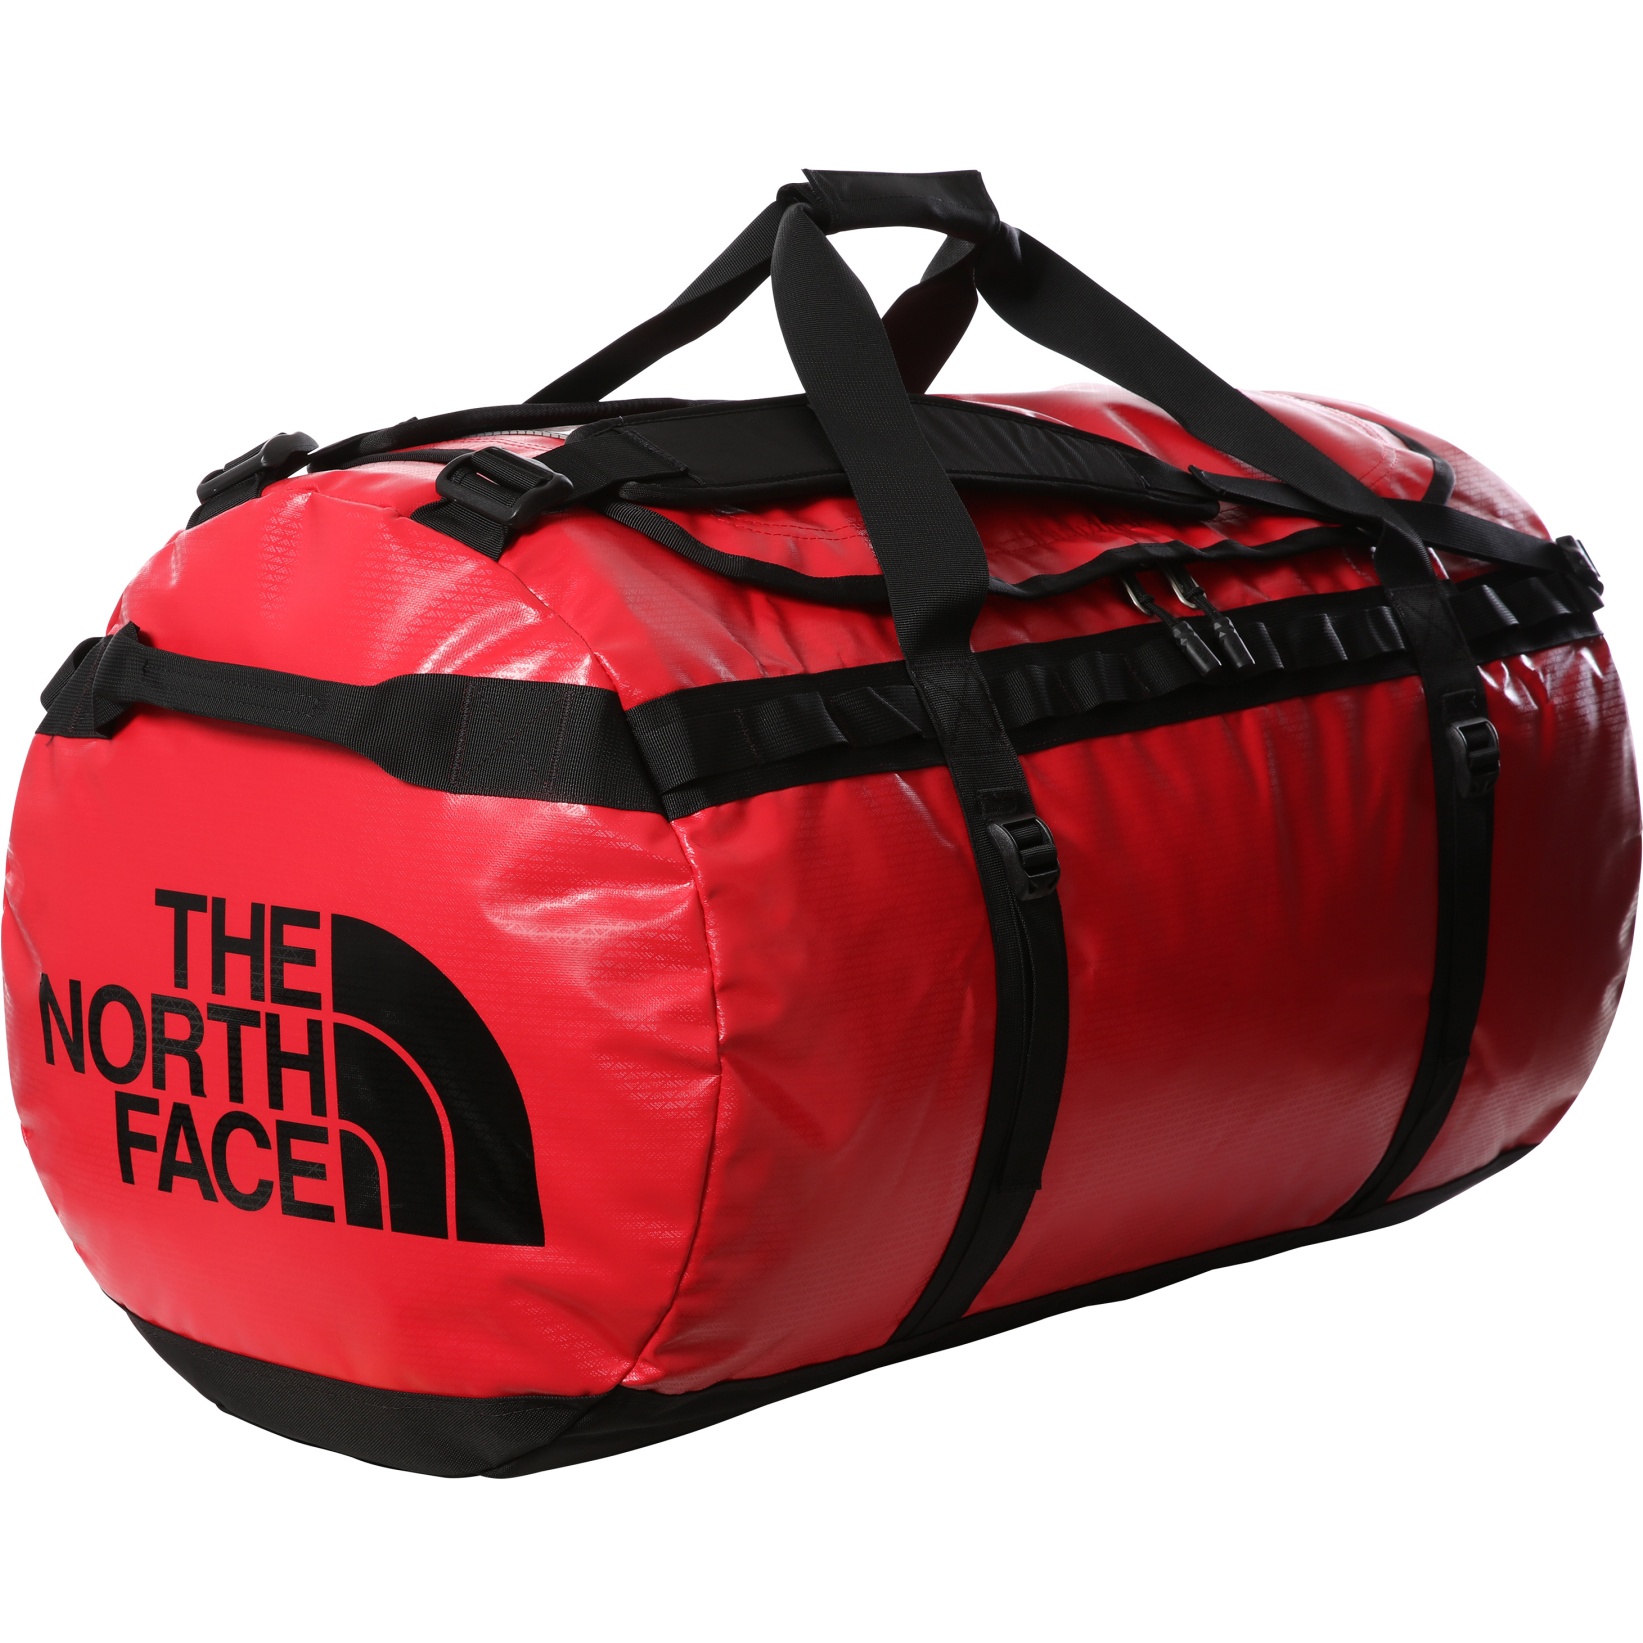 Productfoto van The North Face Base Camp Duffel Reistas - XL - TNF Red/TNF Black